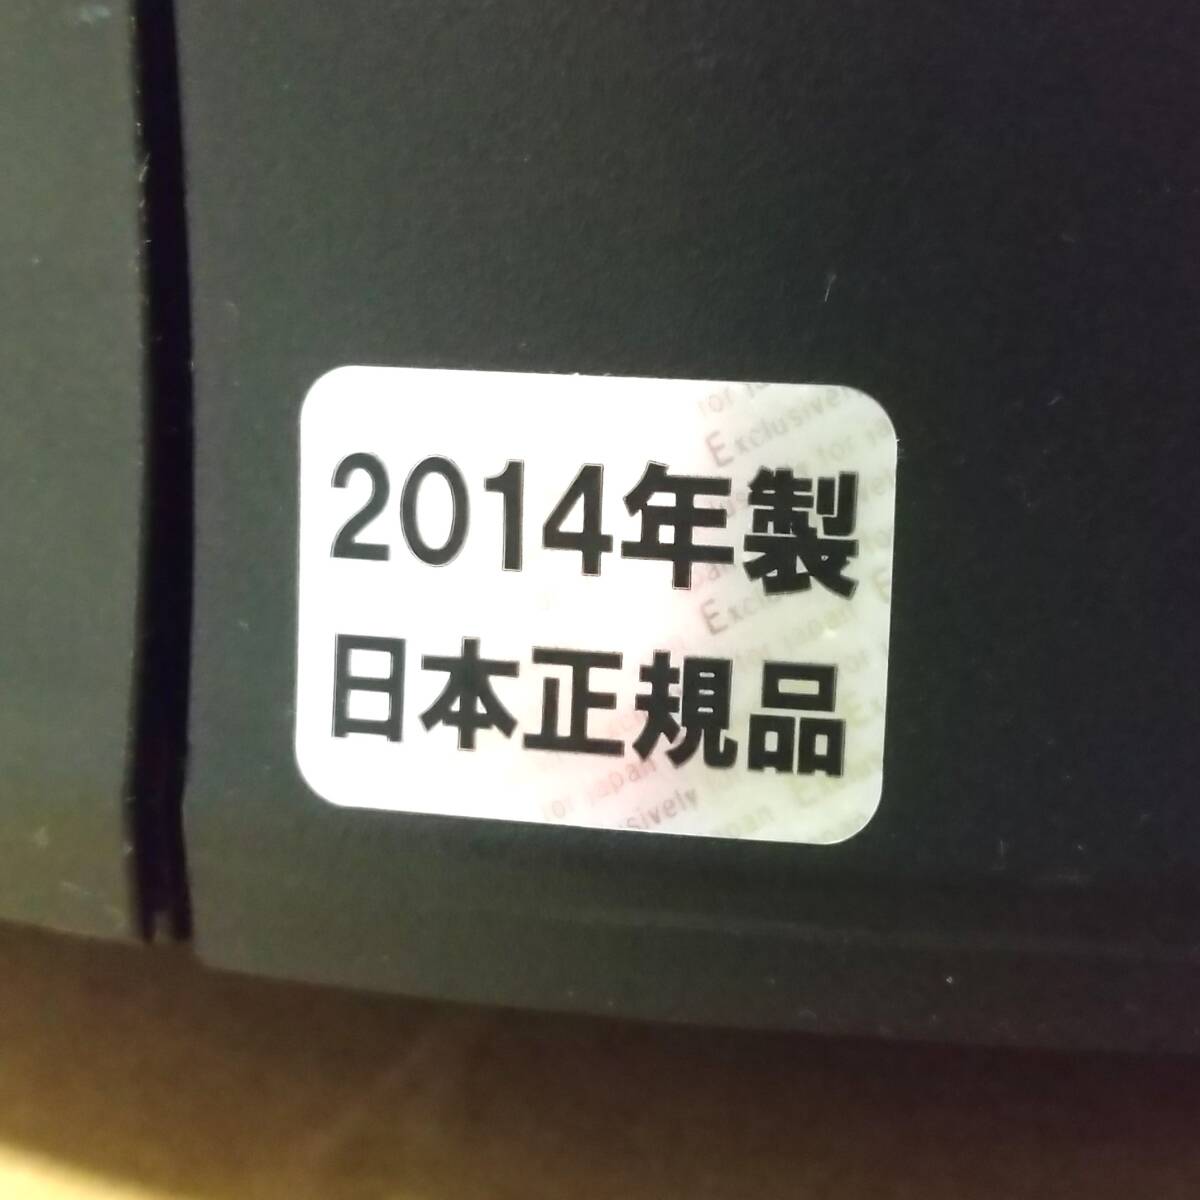 [766] secondhand goods 2014 year made I robot roomba 871